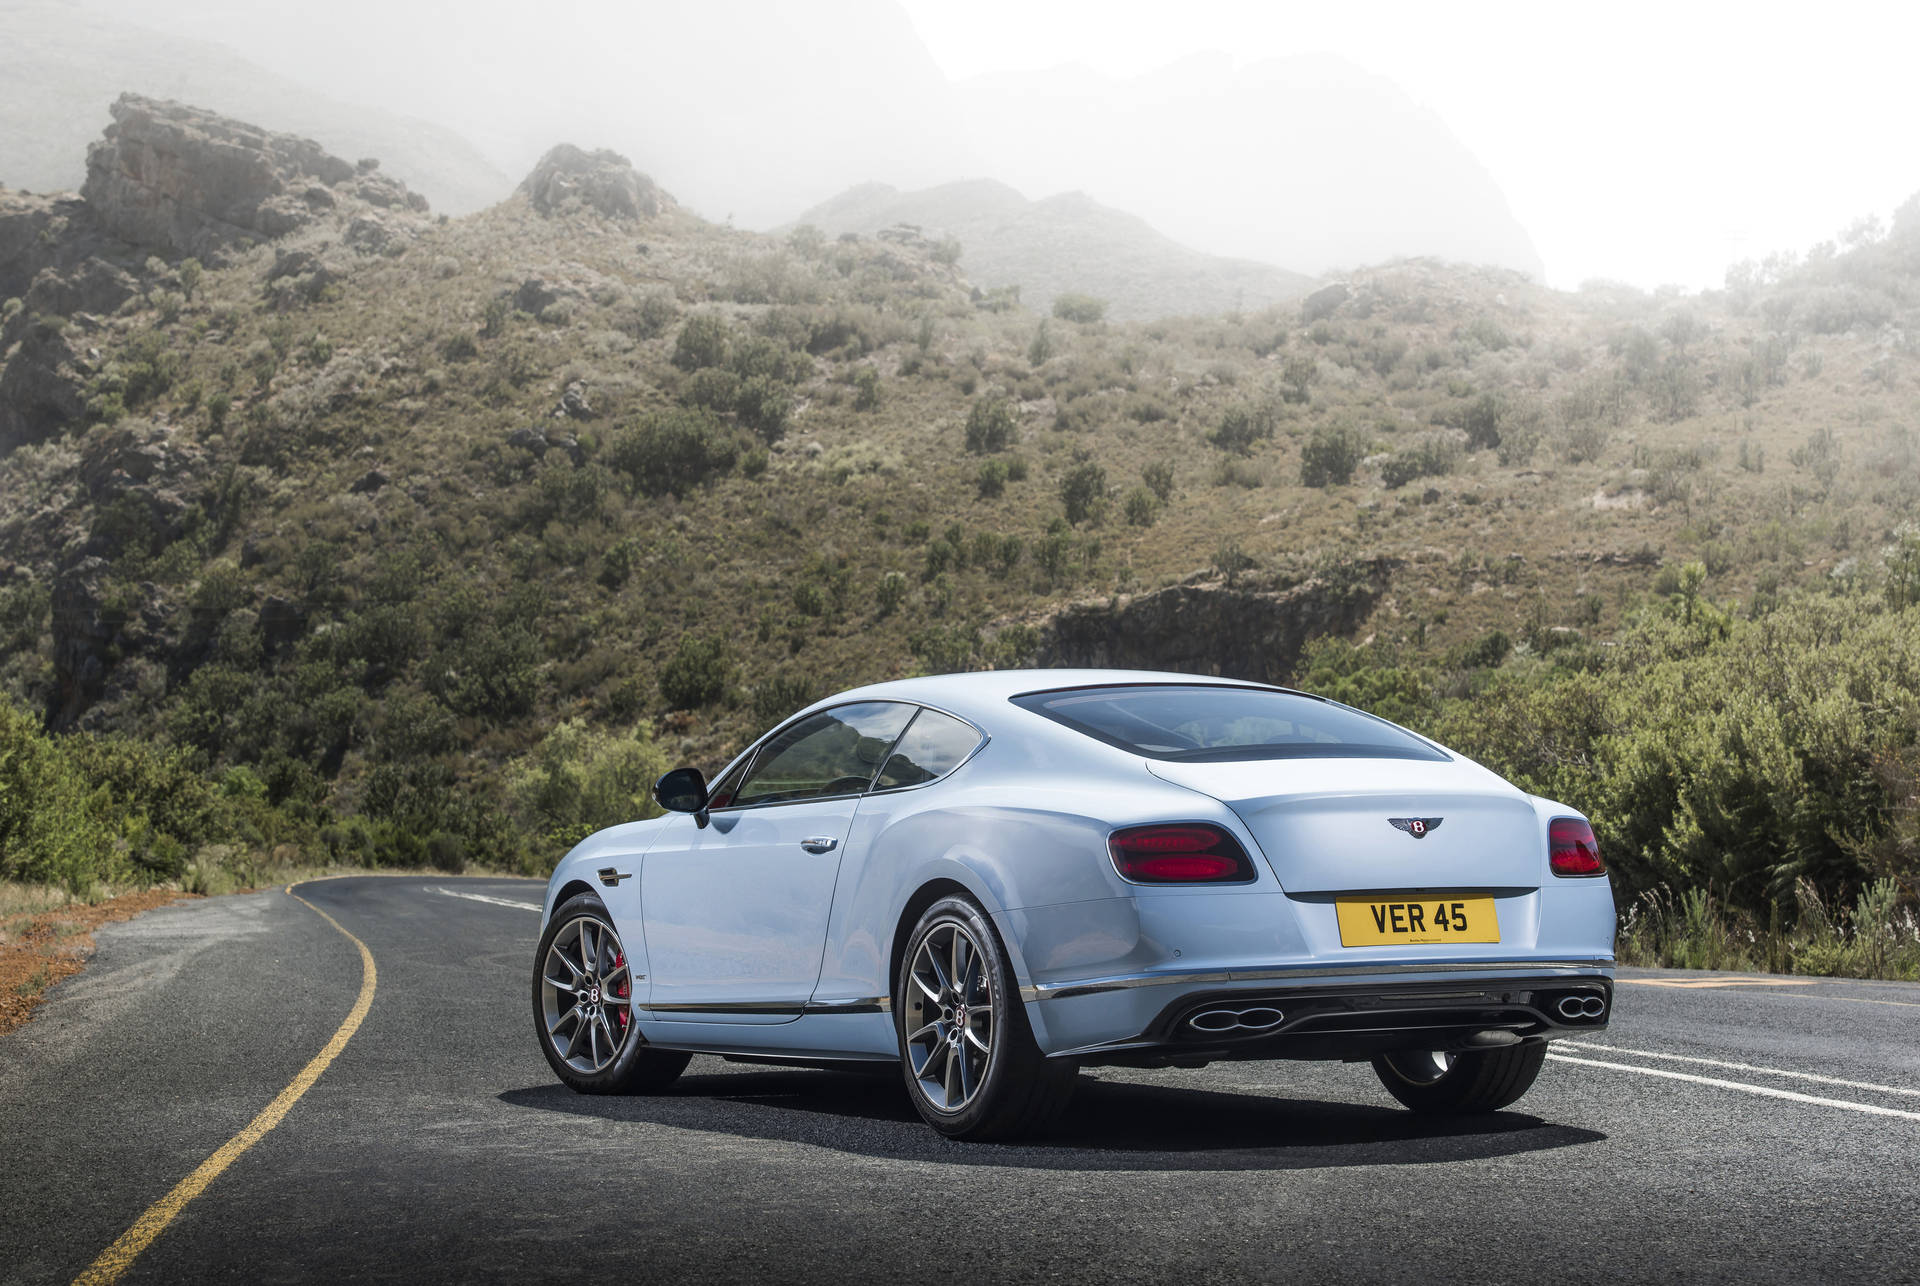 Continental Gt V8 S Bentley Hd Background